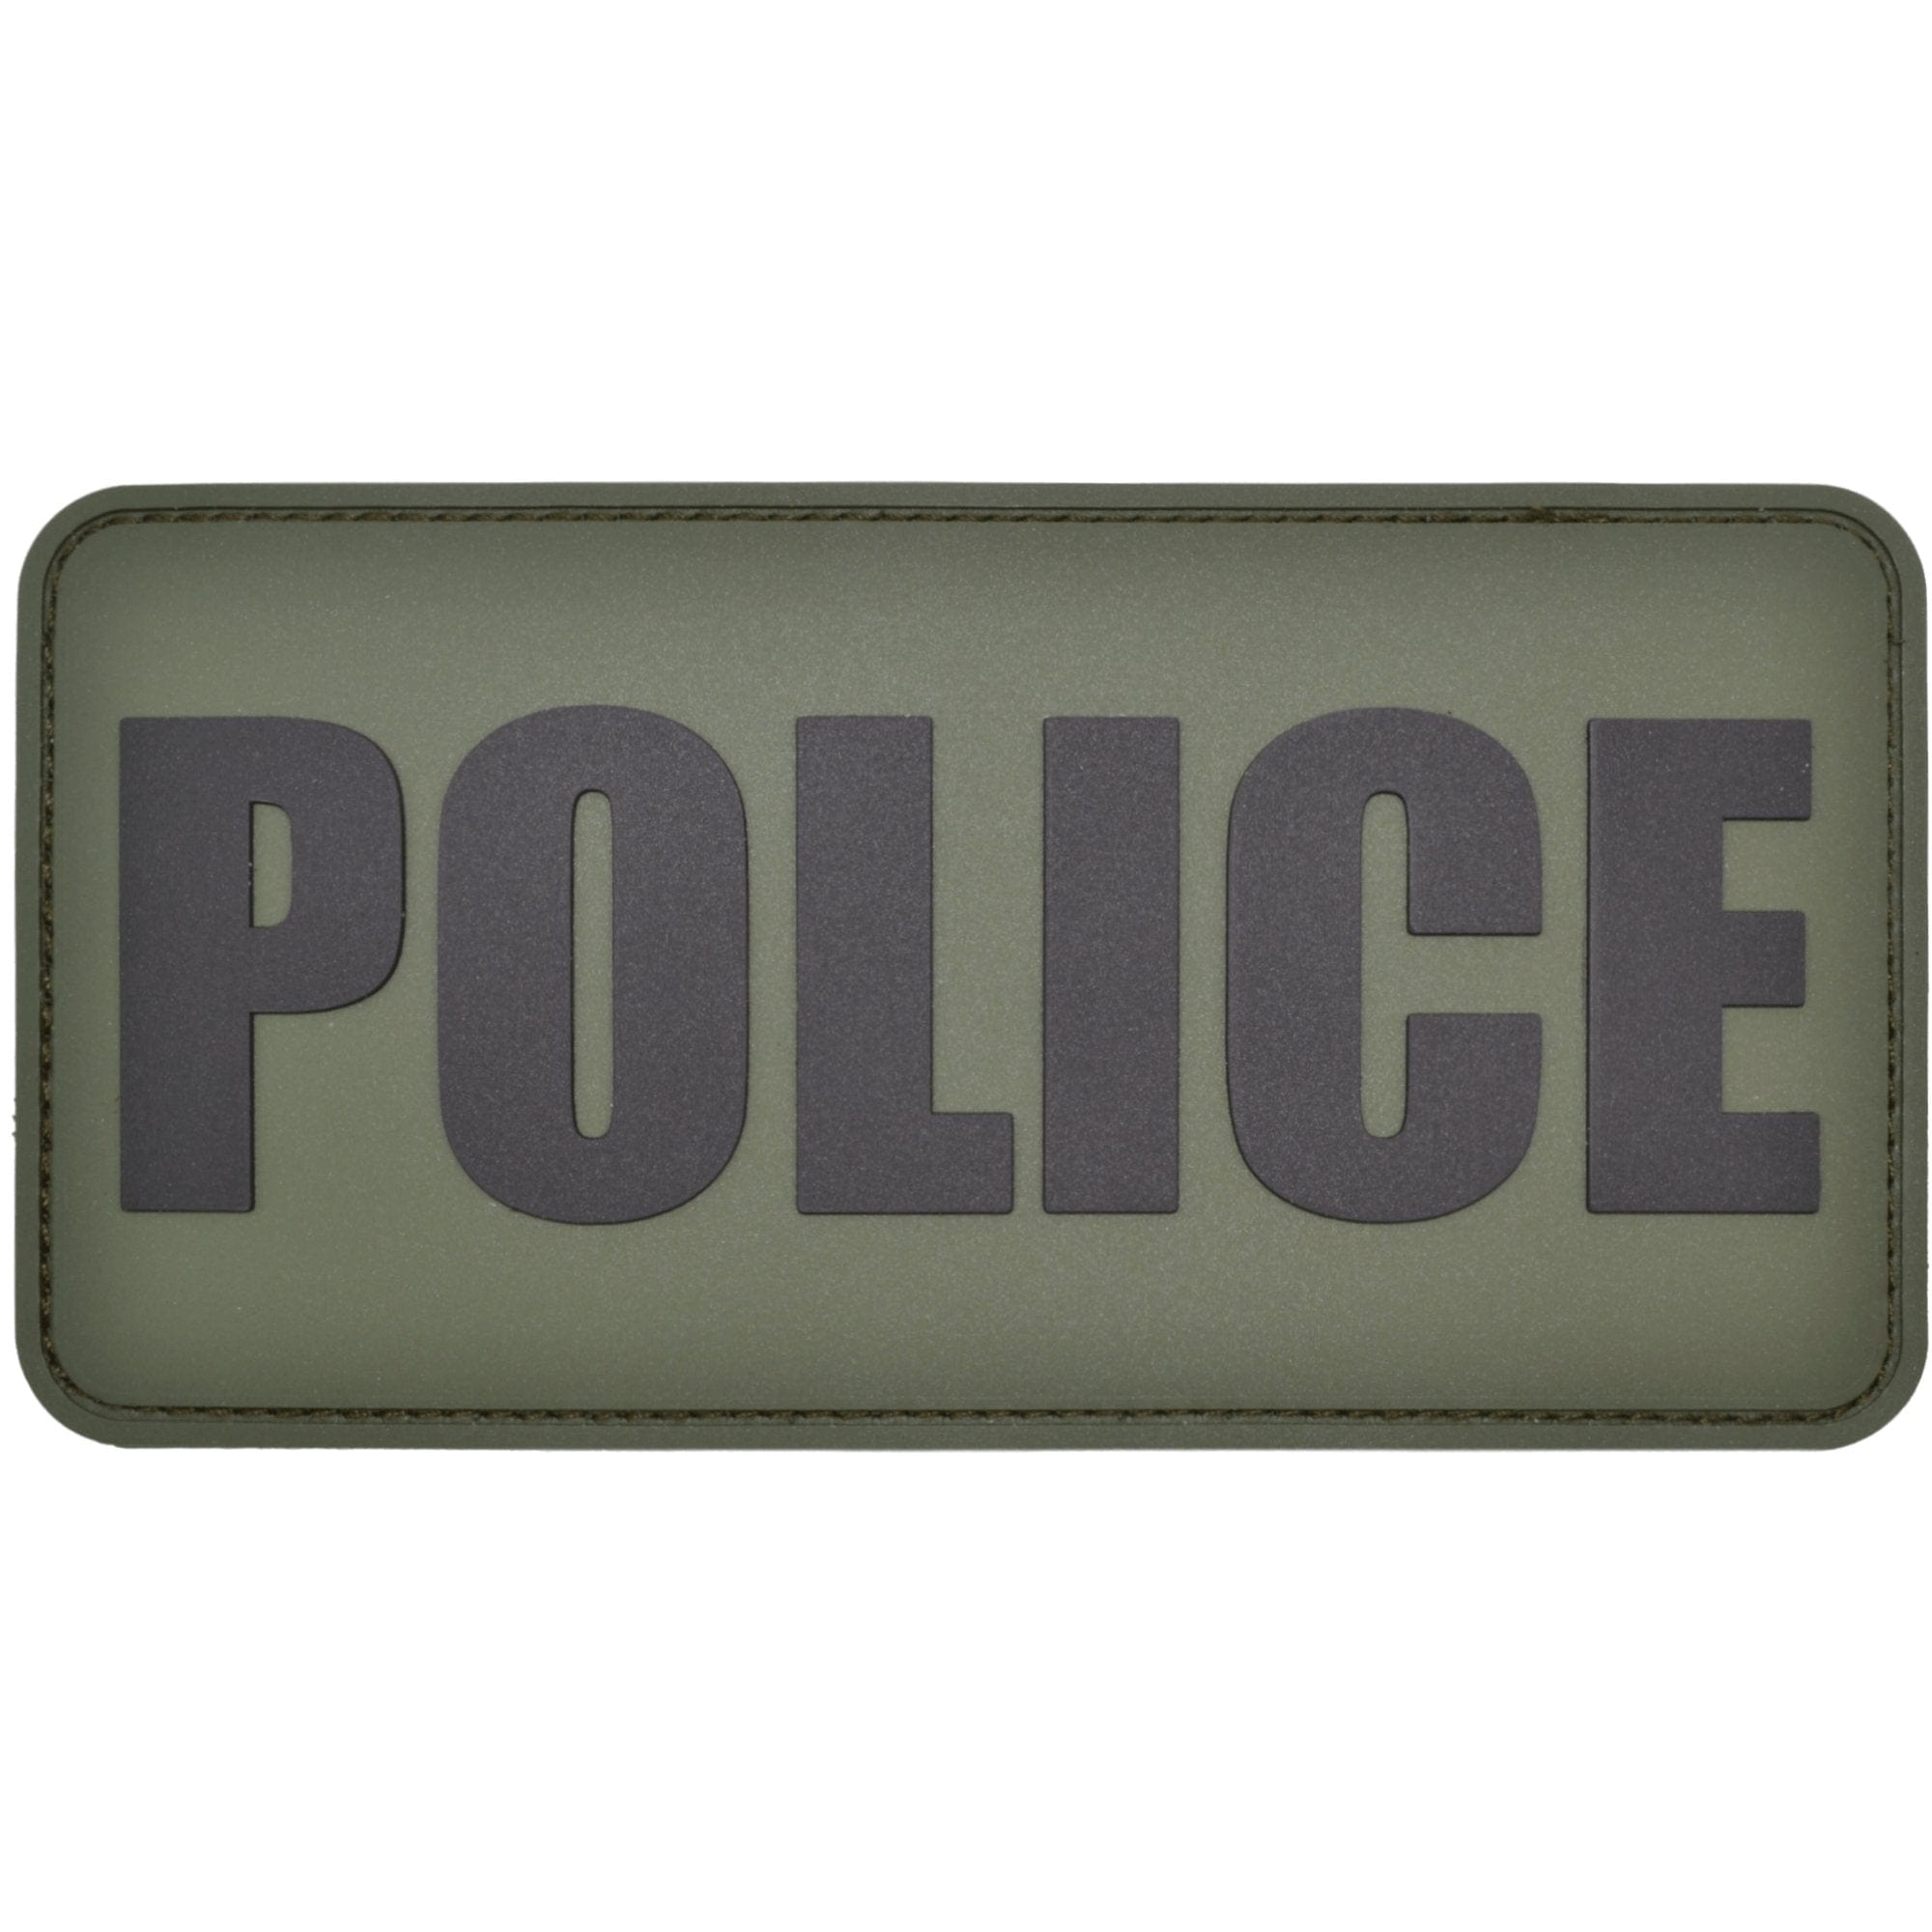 Tactical Gear Junkie Patches Olive Drab Police Plate Carrier - 3x6 PVC Patch